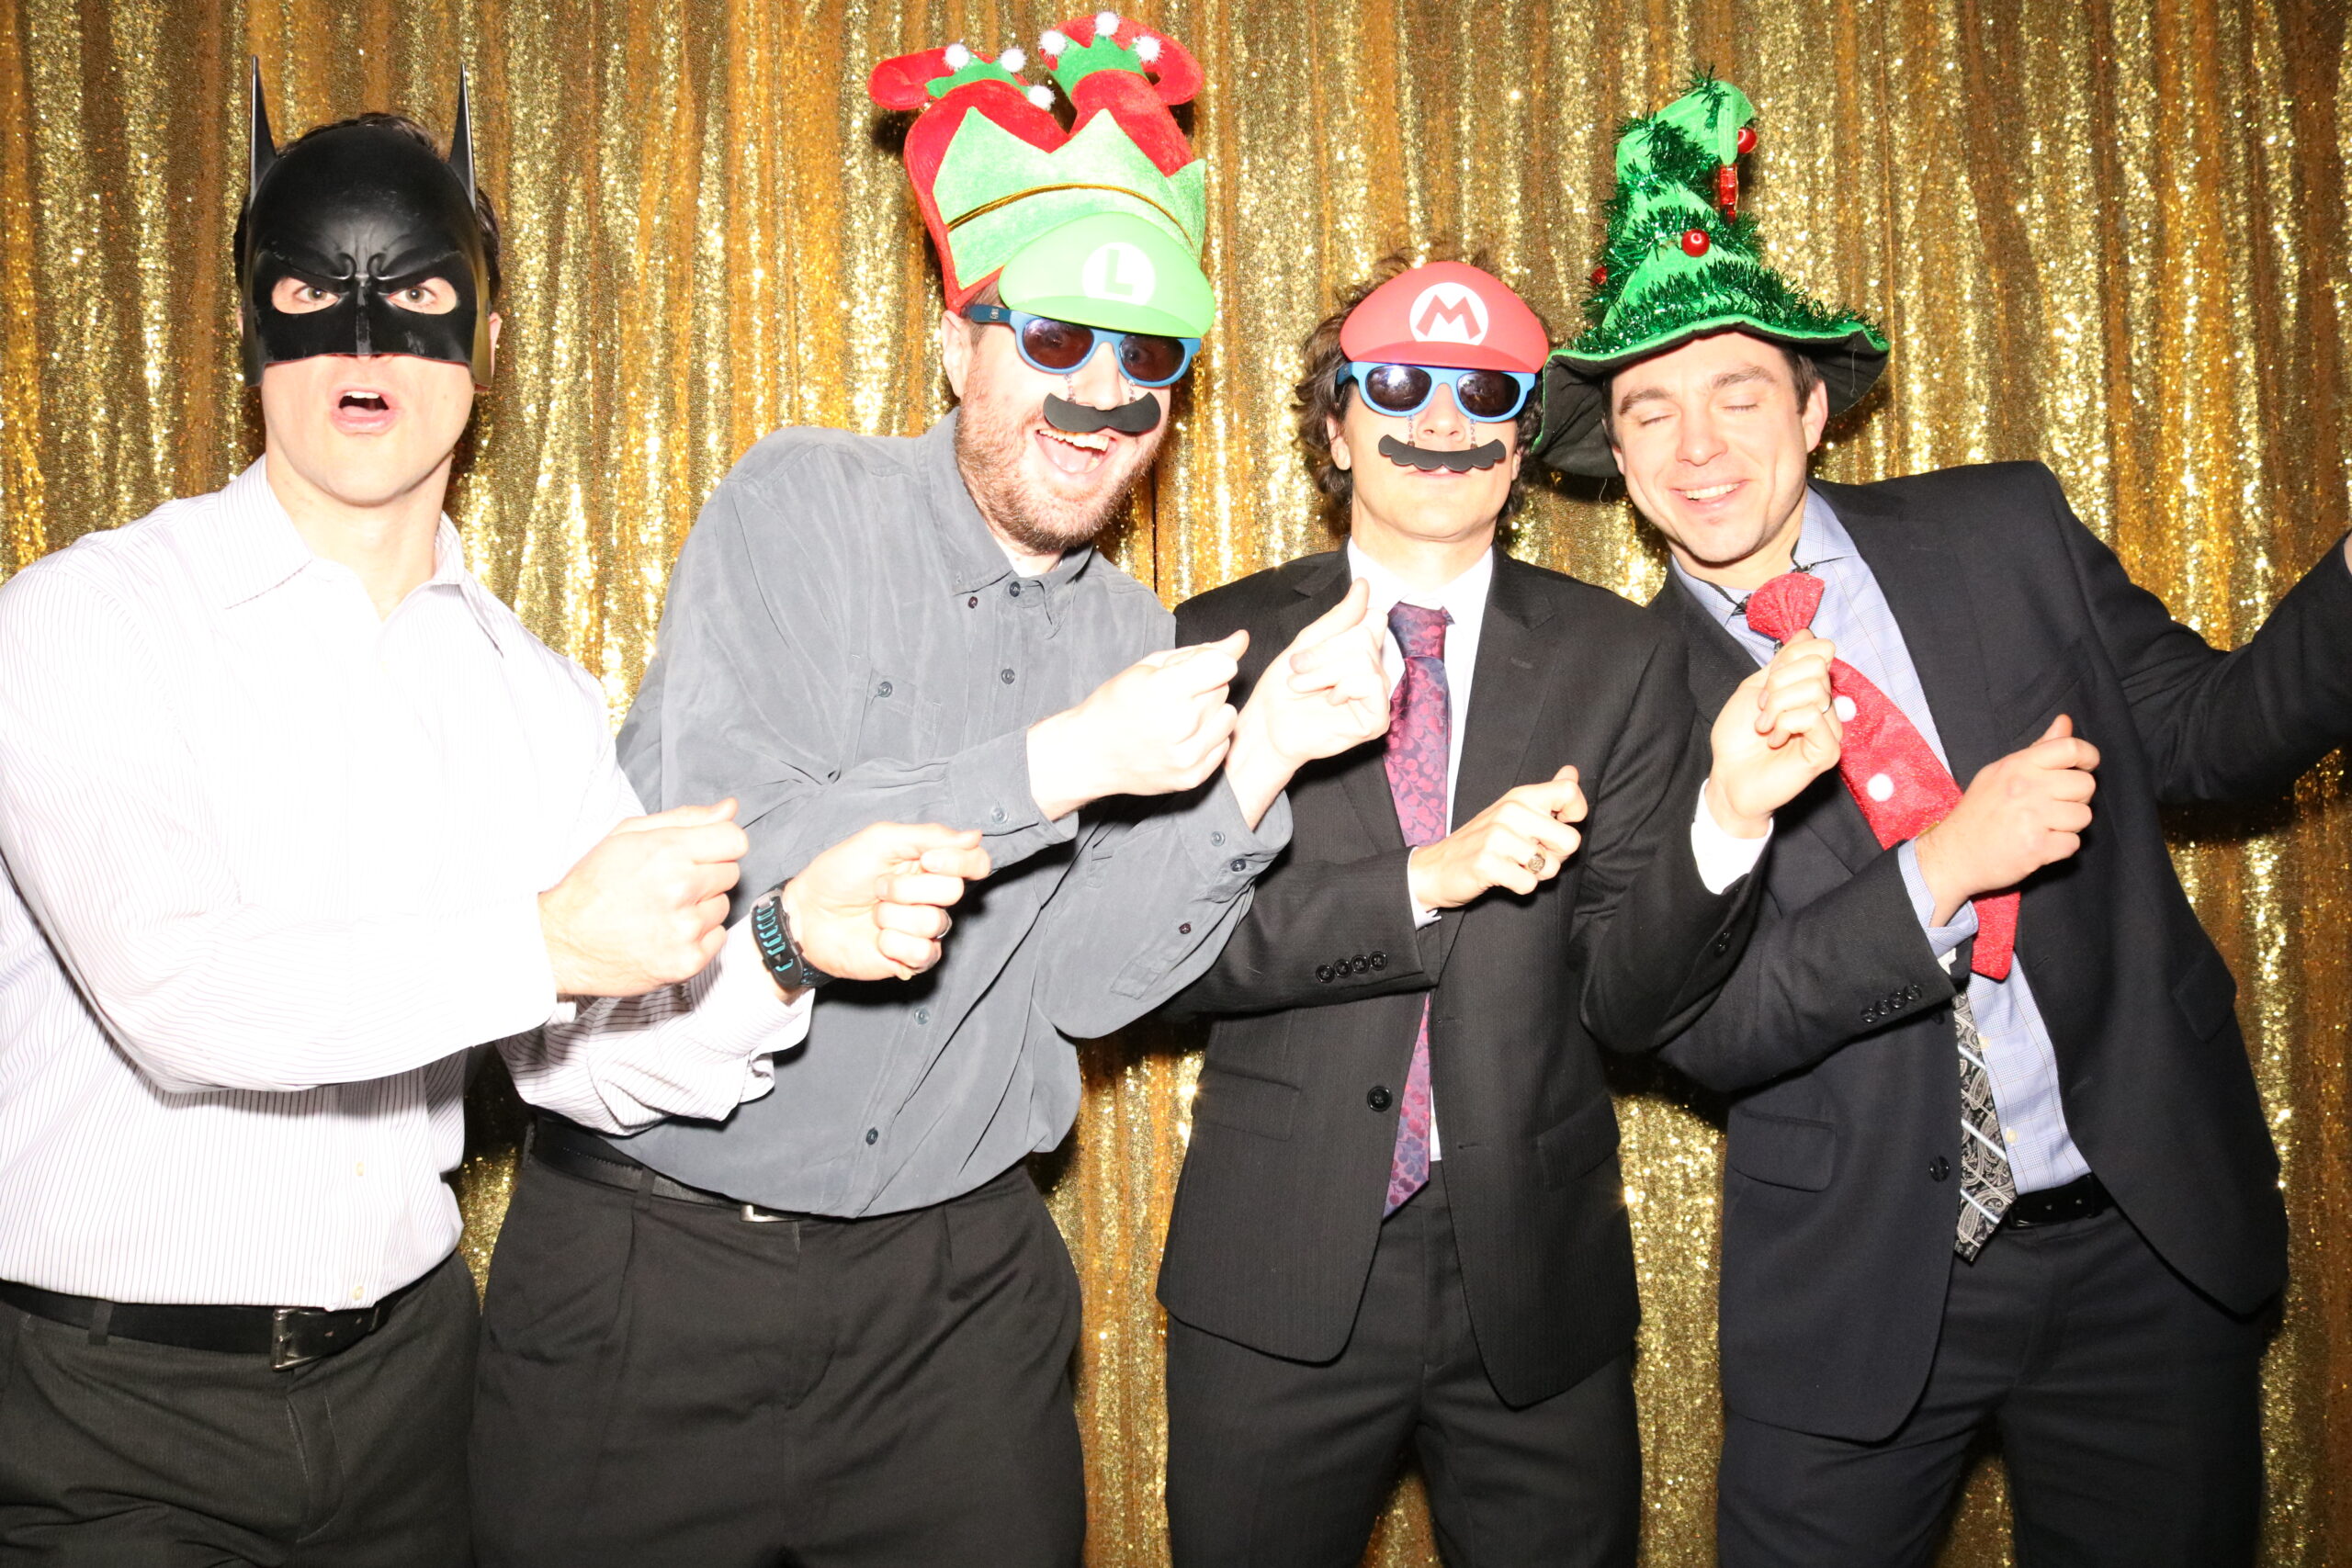 Corporate photo booth rental in Toronto equals more entertainment